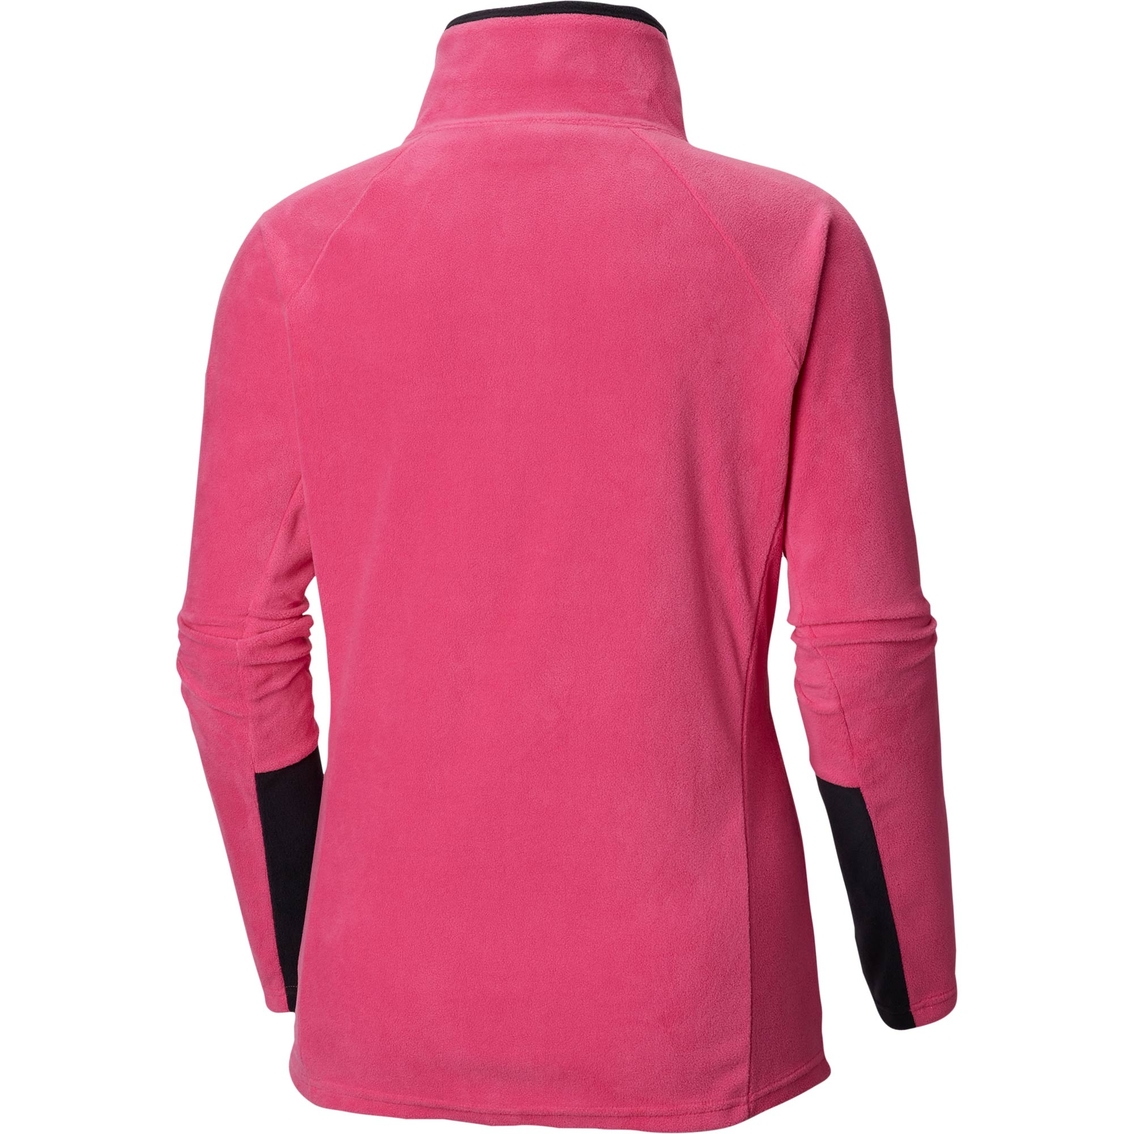 Columbia Tested Tough in Pink Glacial Half Zip Top - Image 2 of 2